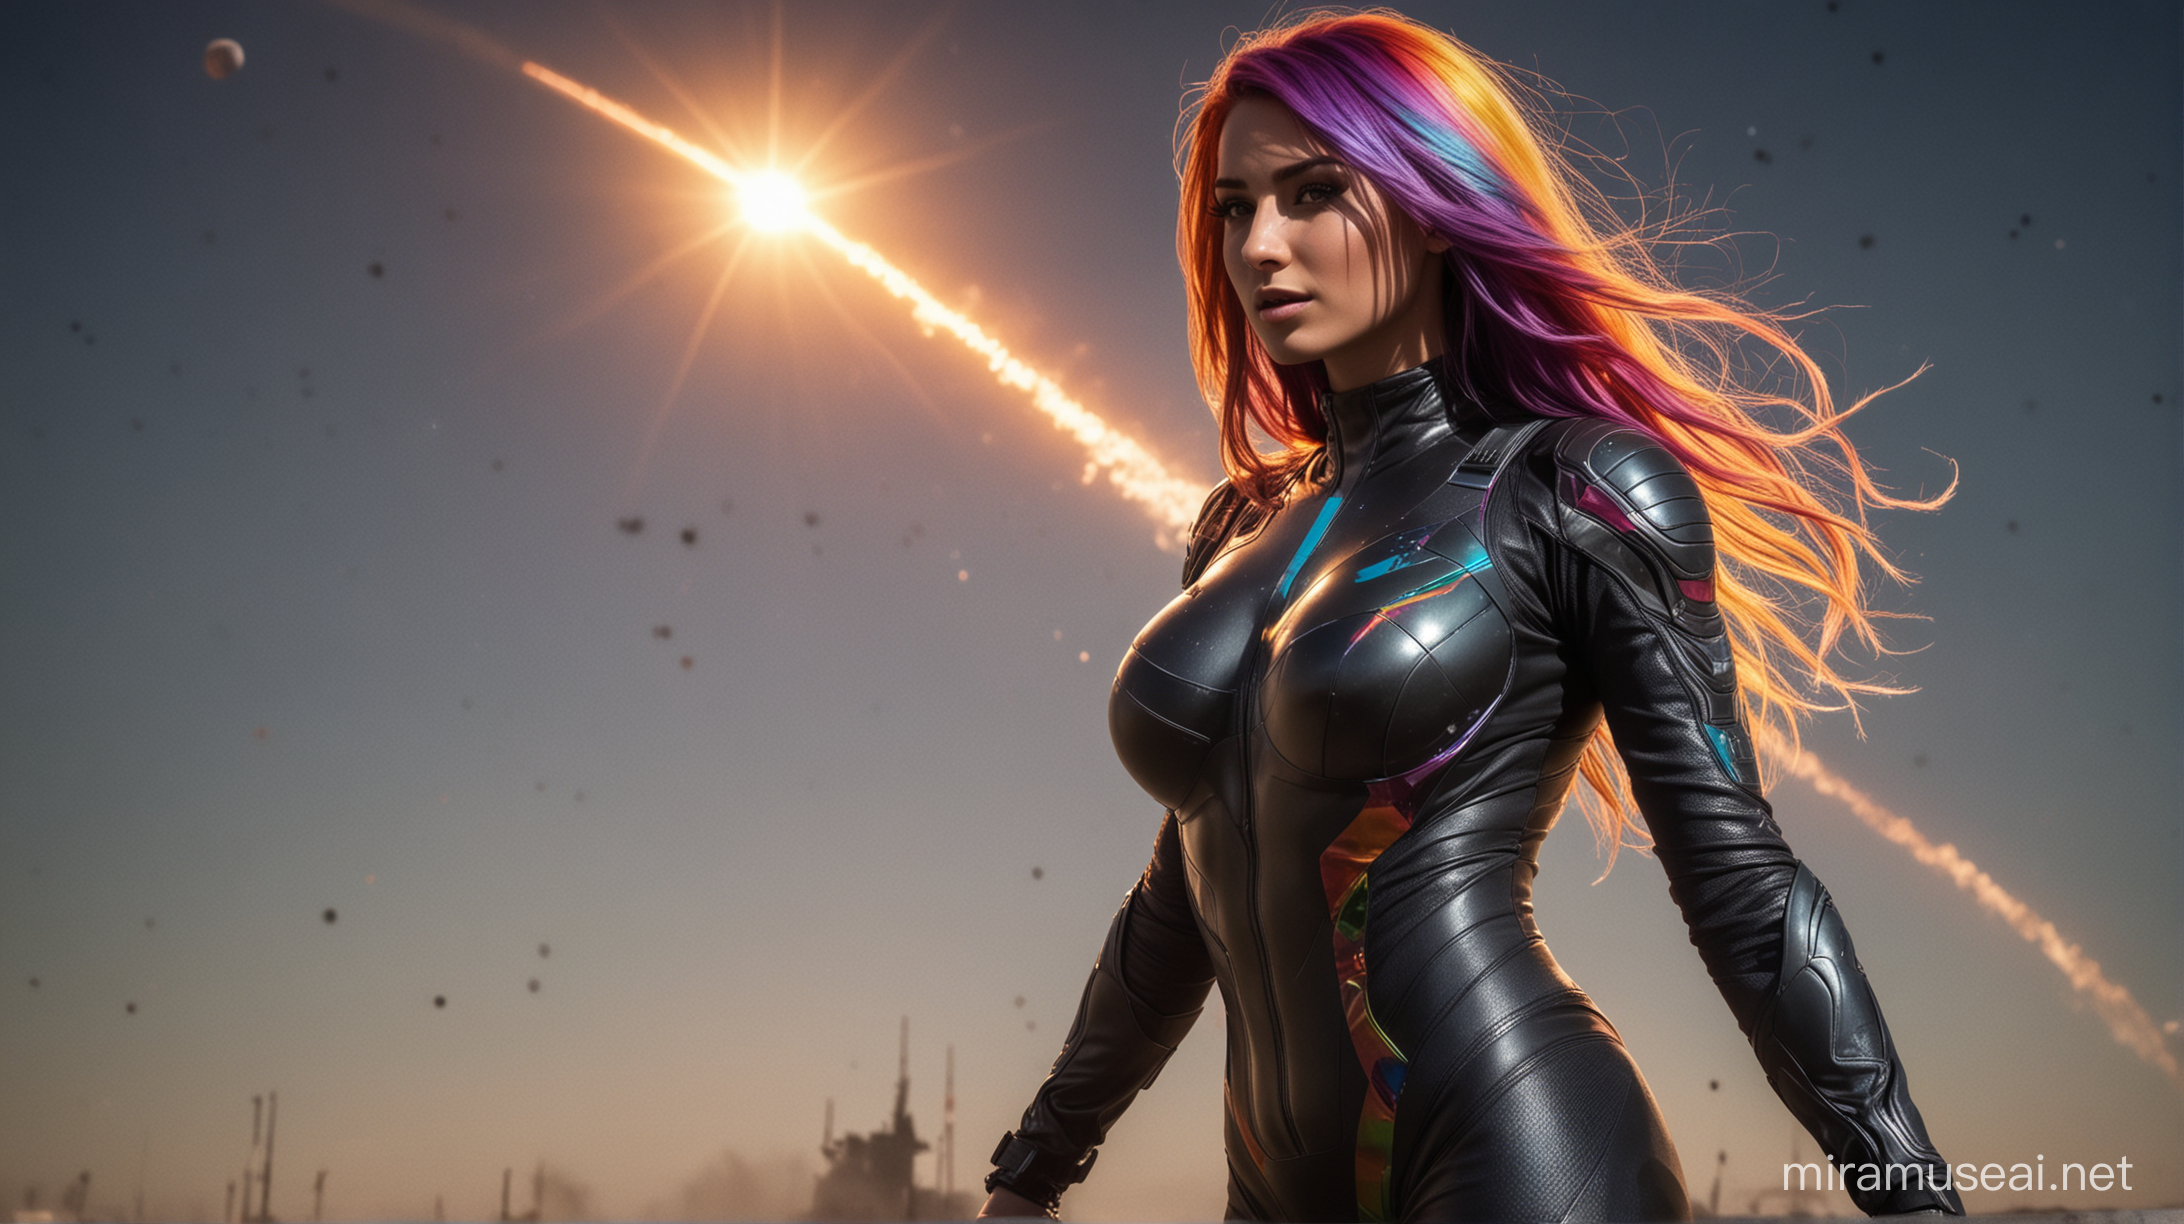 Fierce Female Soldier in Glowing Spacesuit Amidst Explosions on Space Ship Cobra 3